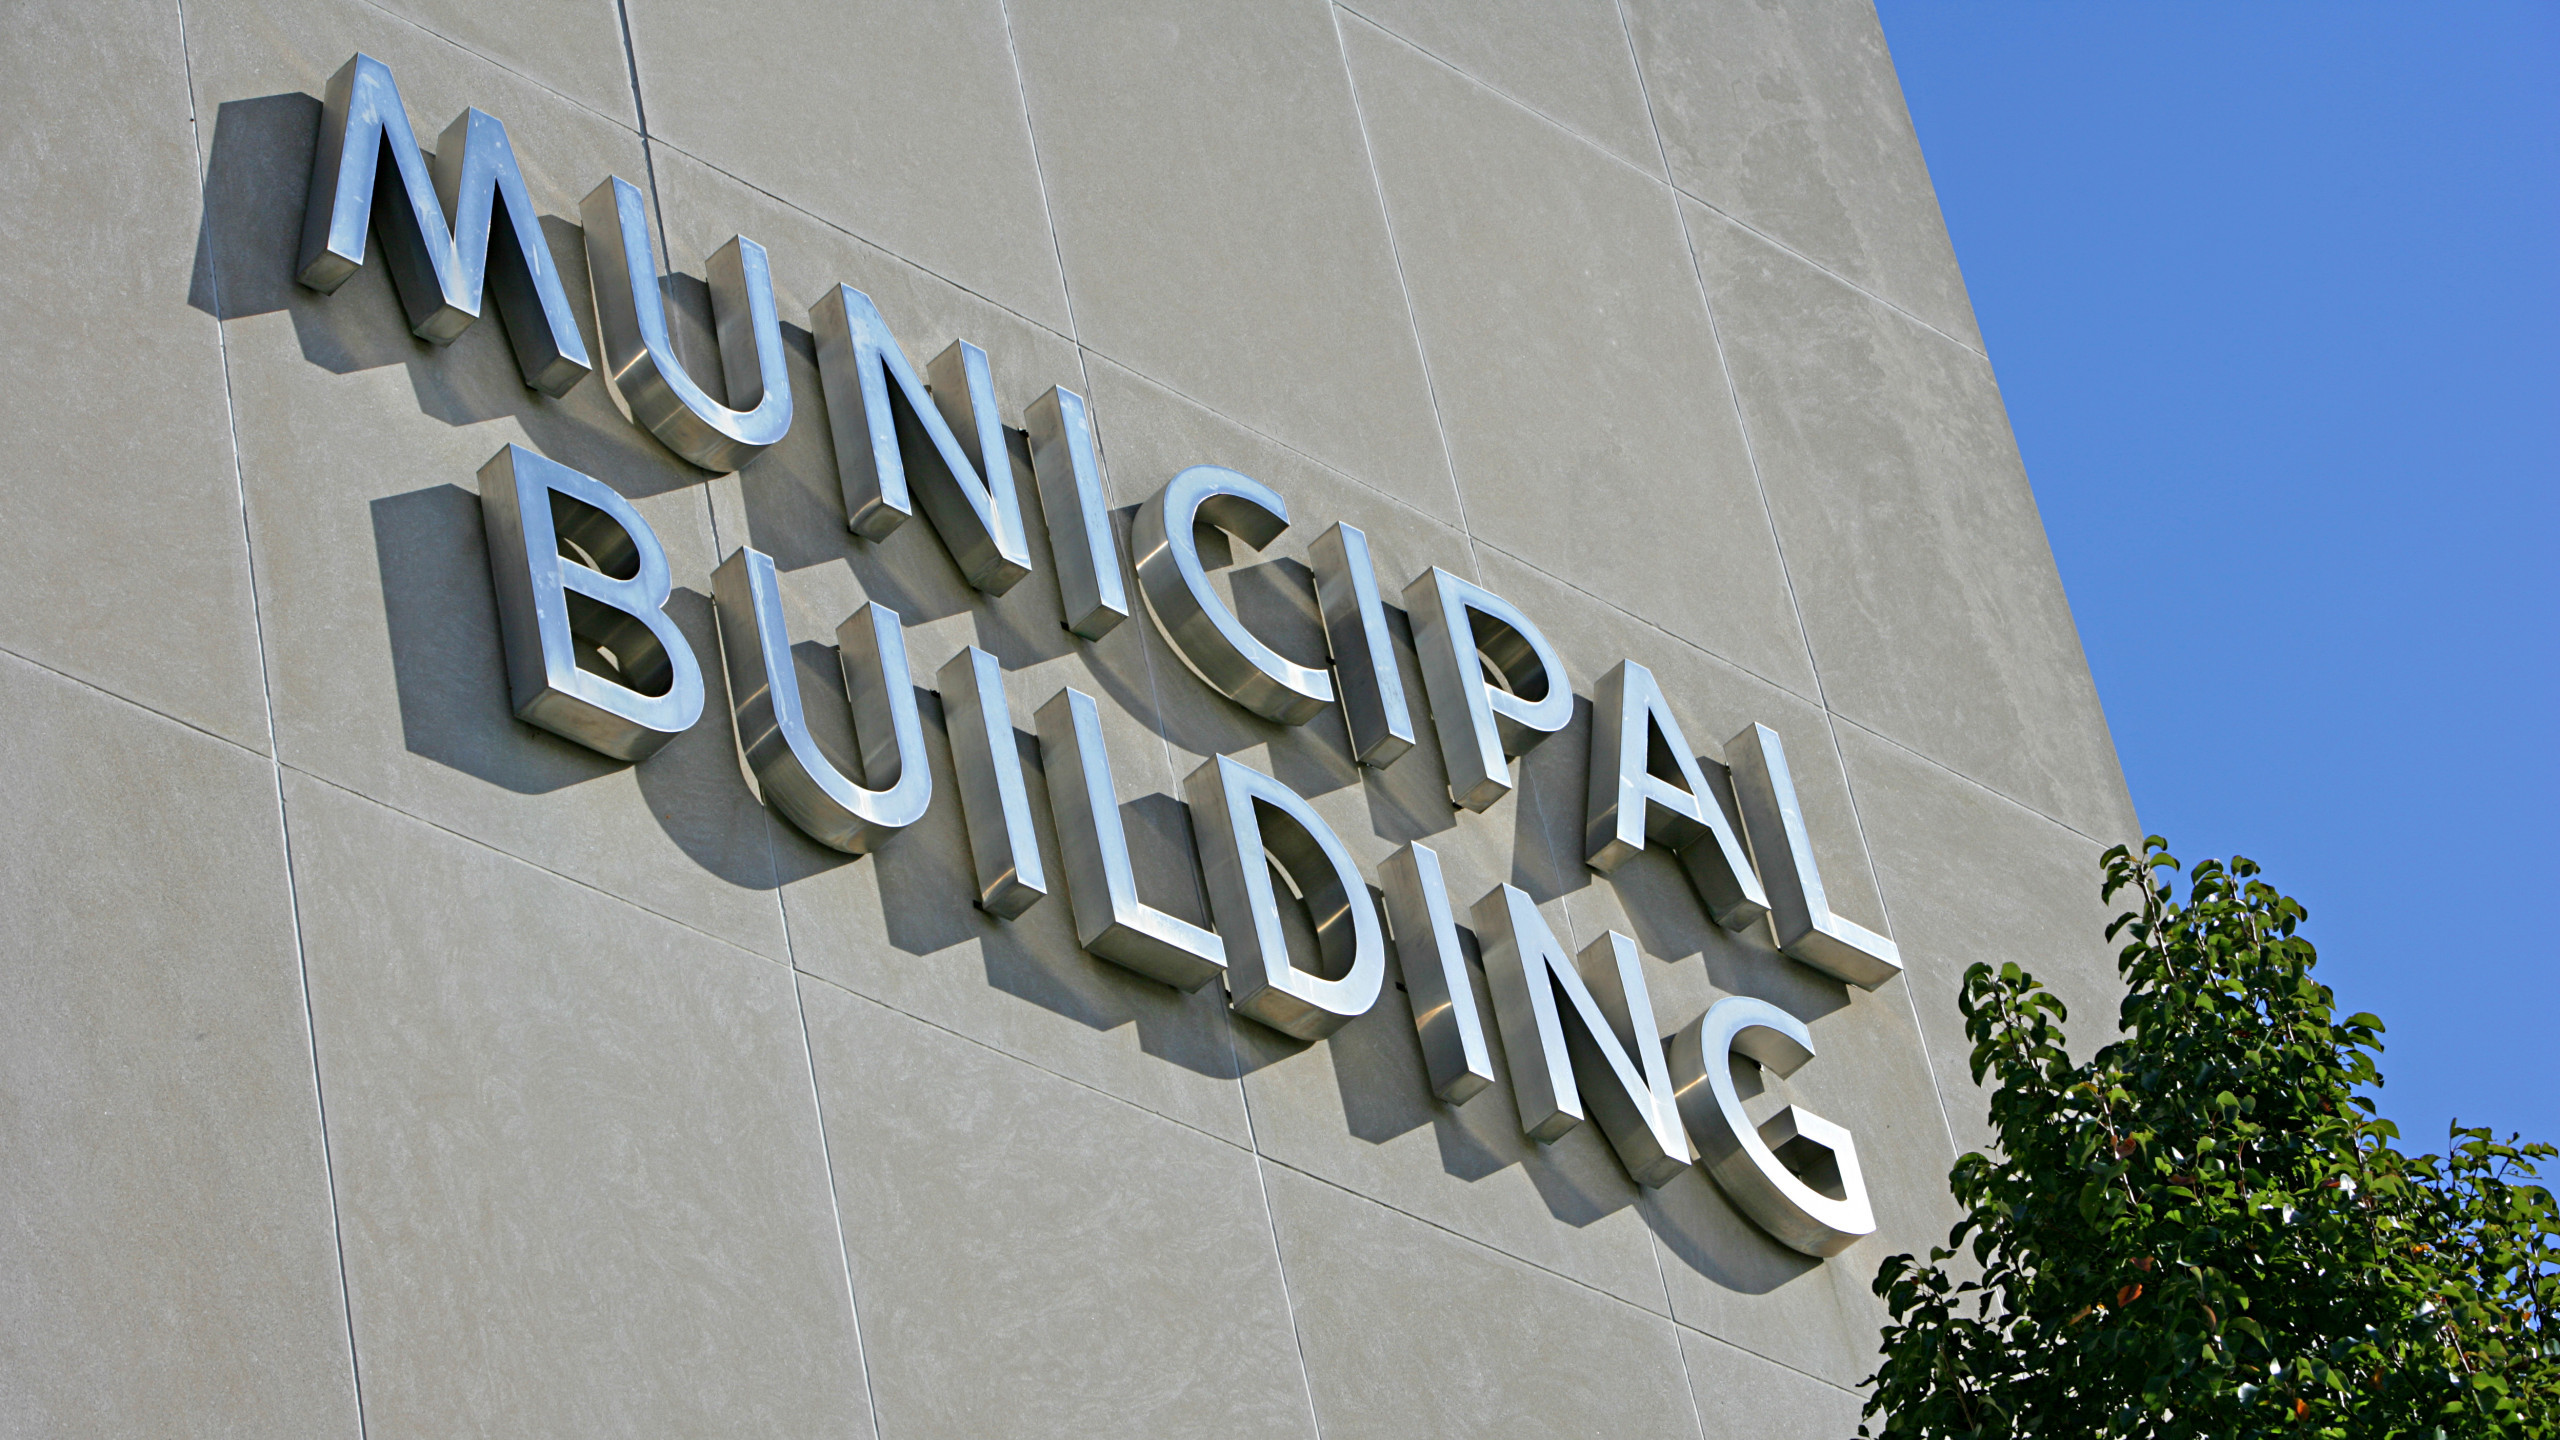 Exterior of building with "Municipal" sign